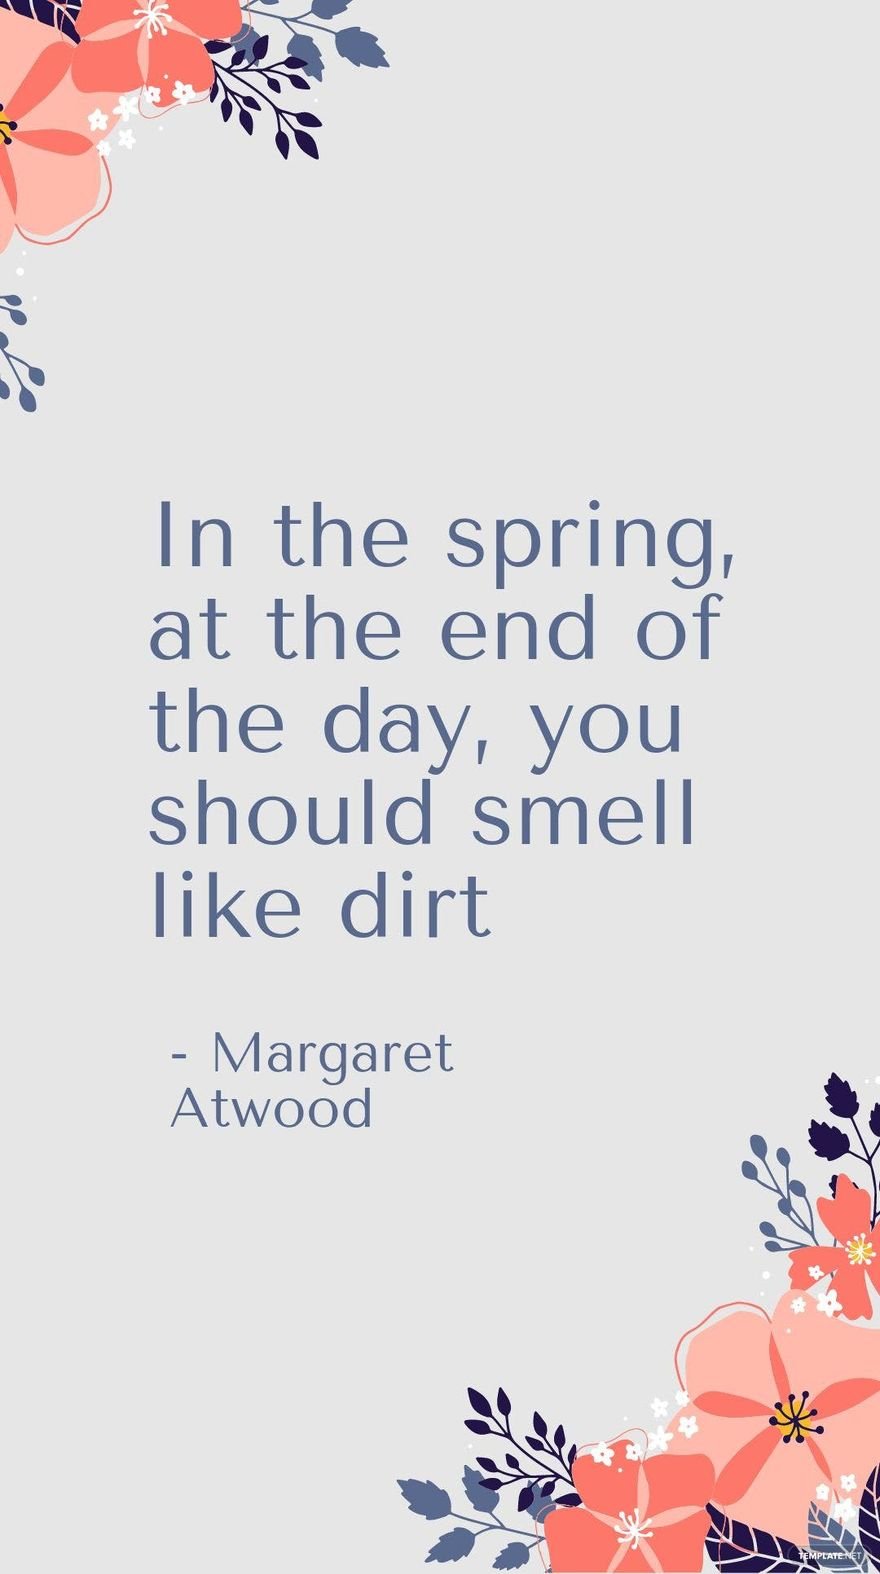 Free Margaret Atwood - In the spring, at the end of the day, you should smell like dirt in JPG